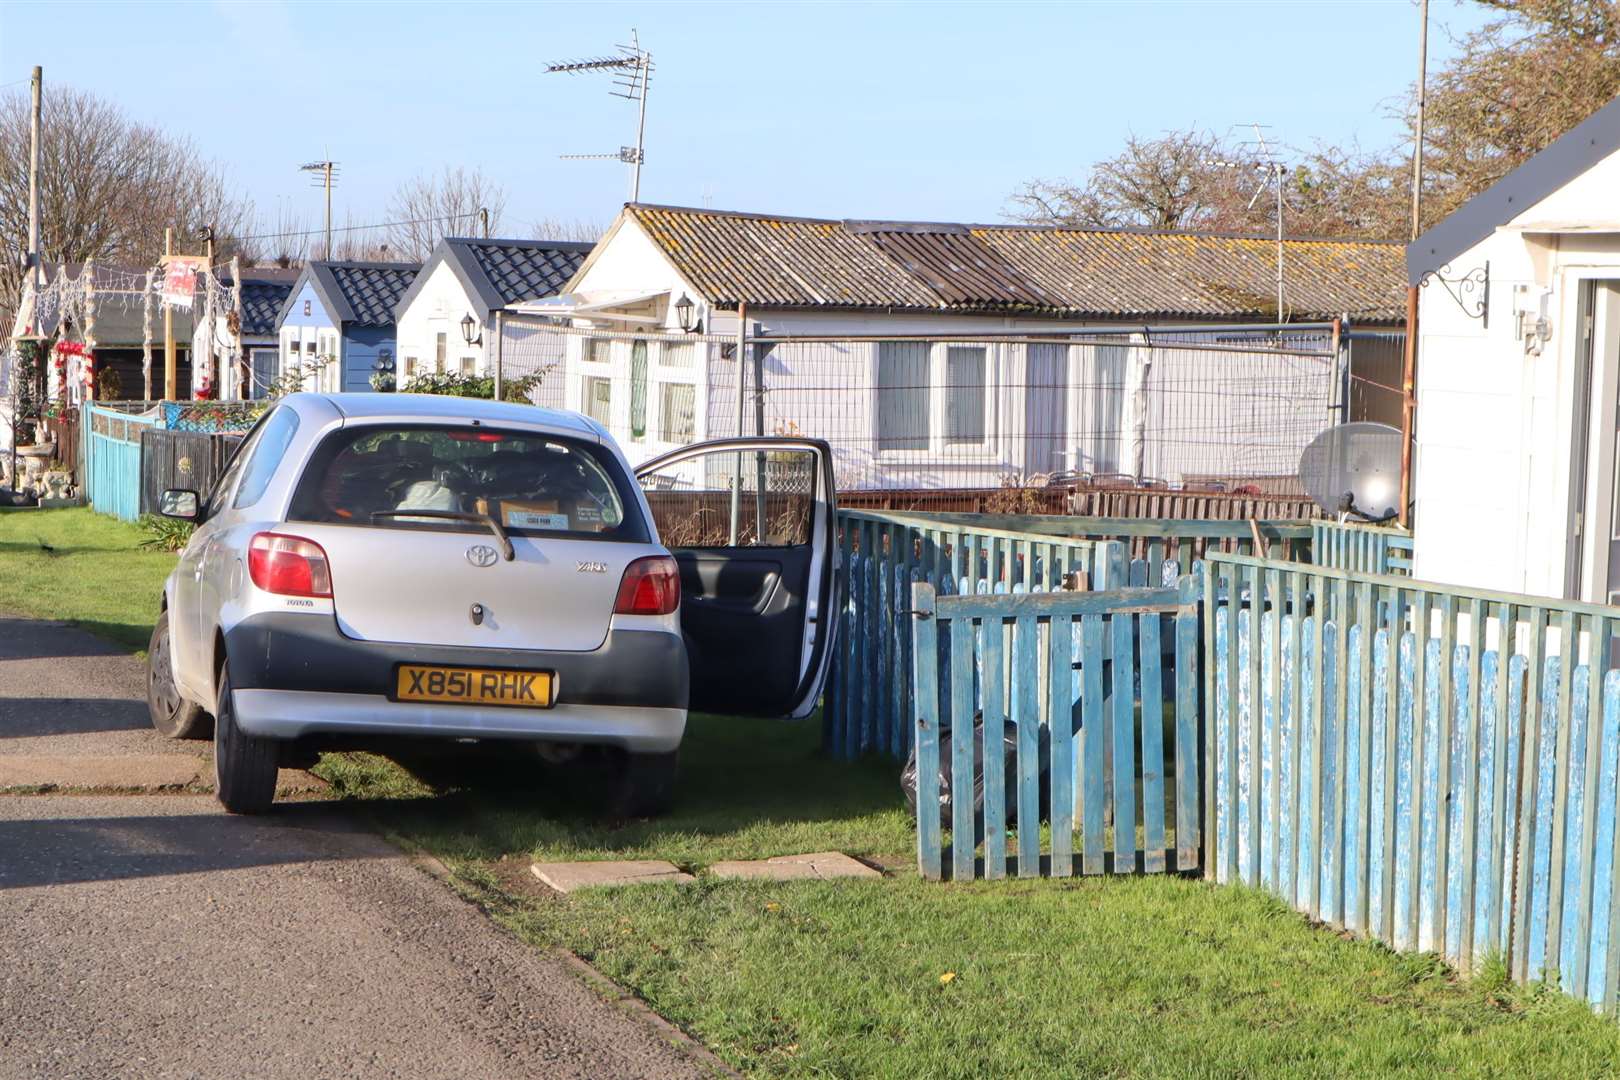 Residents were told to quit Eastern Road Holiday Park, Leysdown, by noon on Wednesday